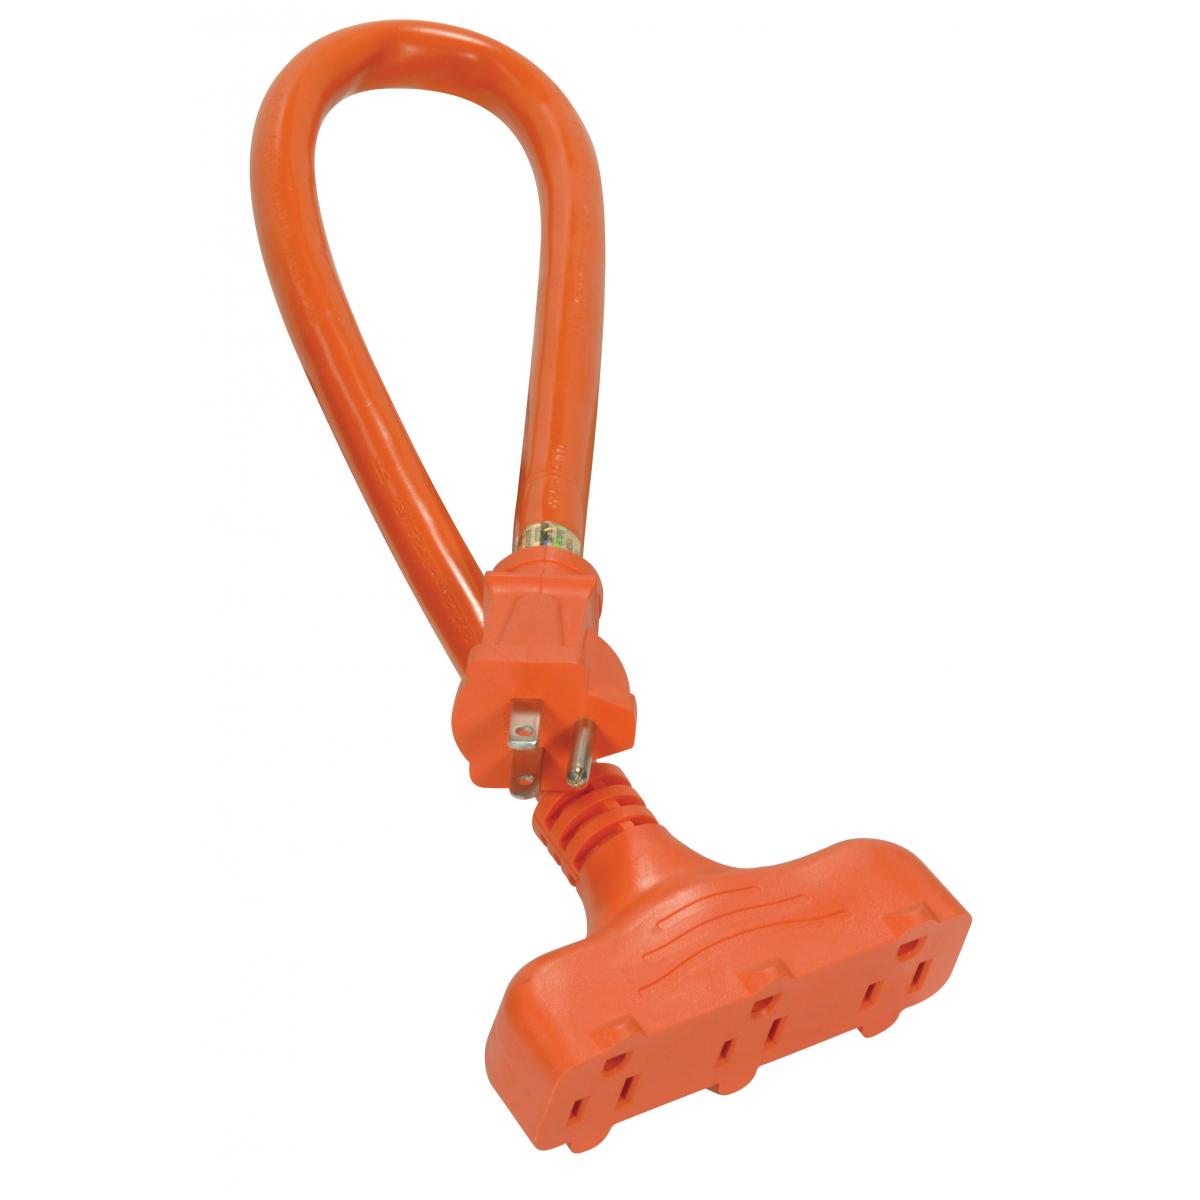 Satco 93-5030 2 Foot Orange Heavy Duty 3 Outlet Outdoor Extension Cord 12/3 Ga. STW Orange 3 Outlet Cord 15A-125V 1825W